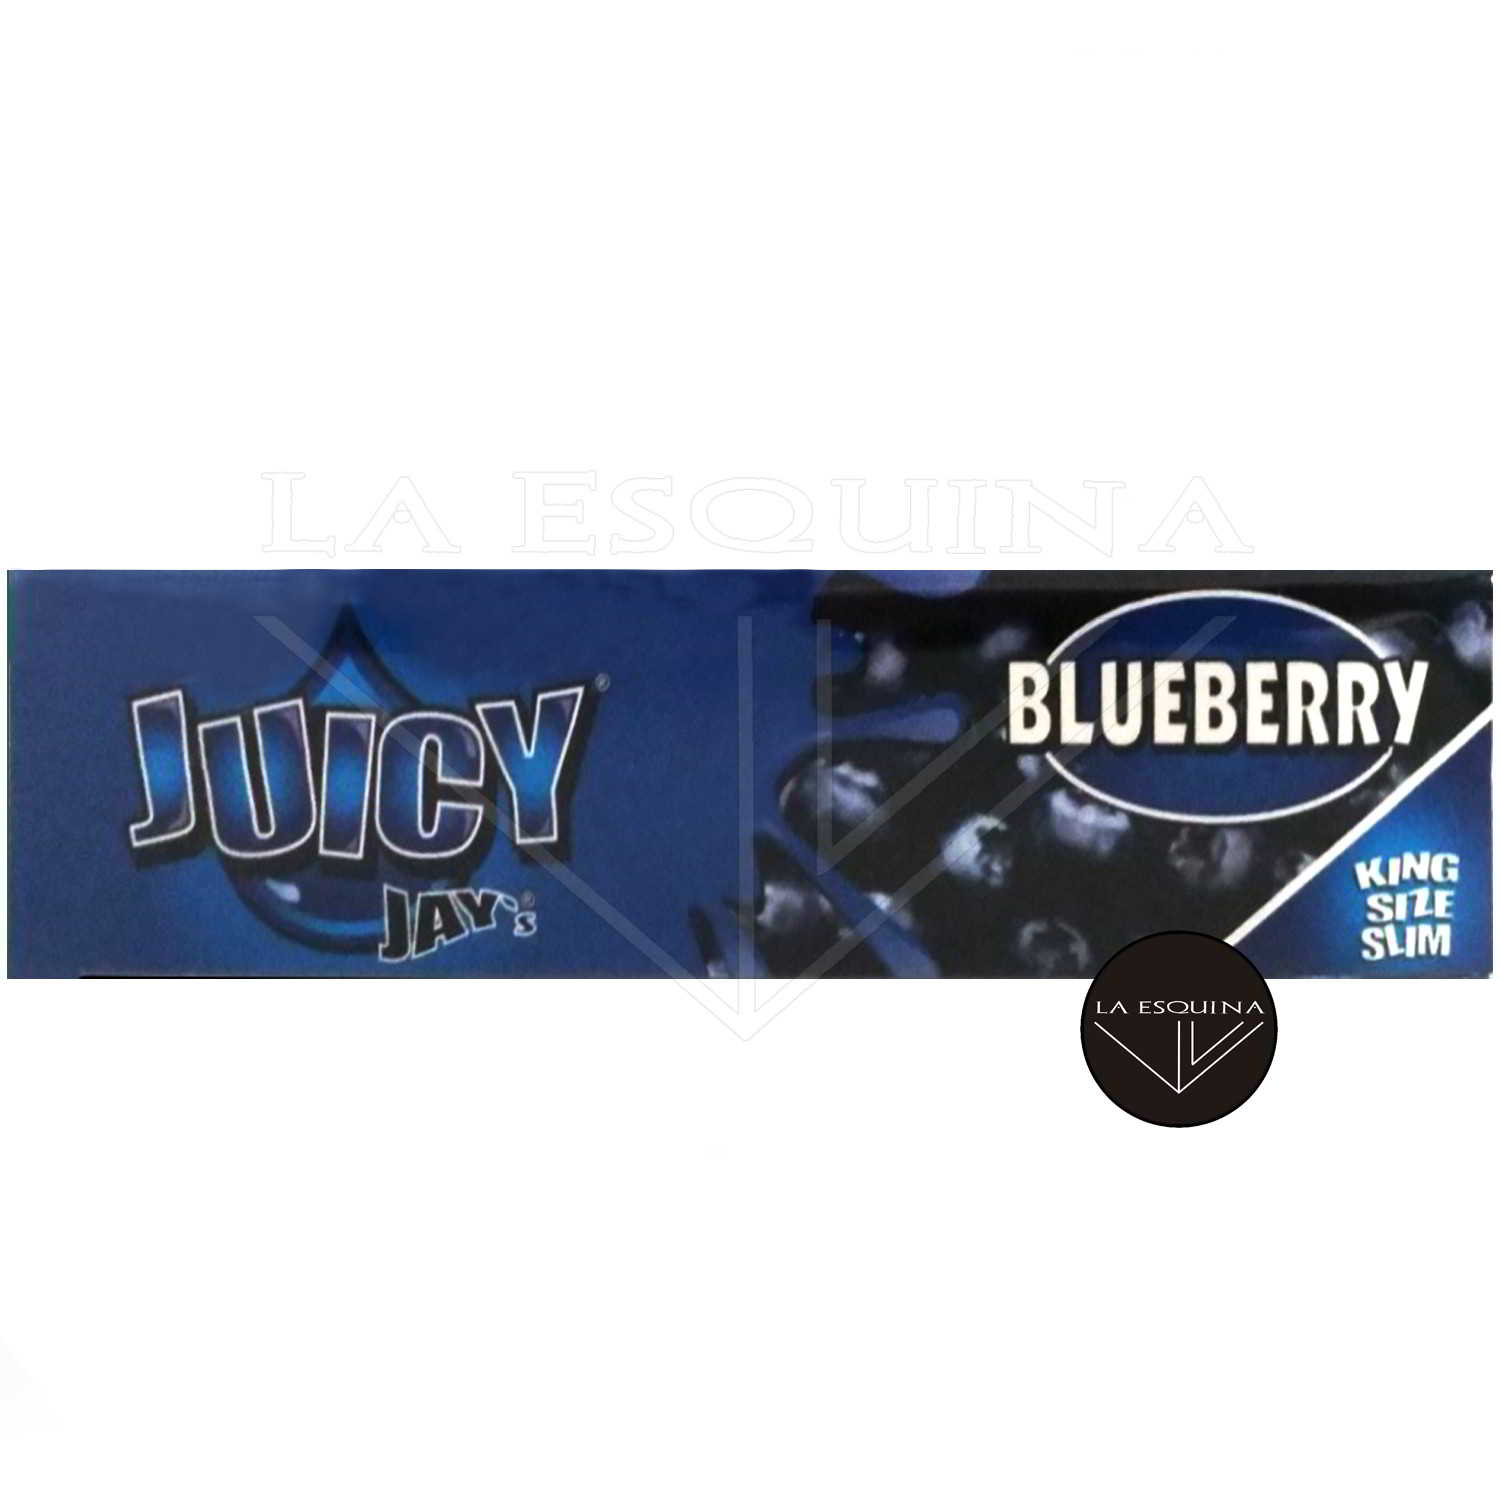 Papel JUICY JAY’S King Size Blueberry 110mm